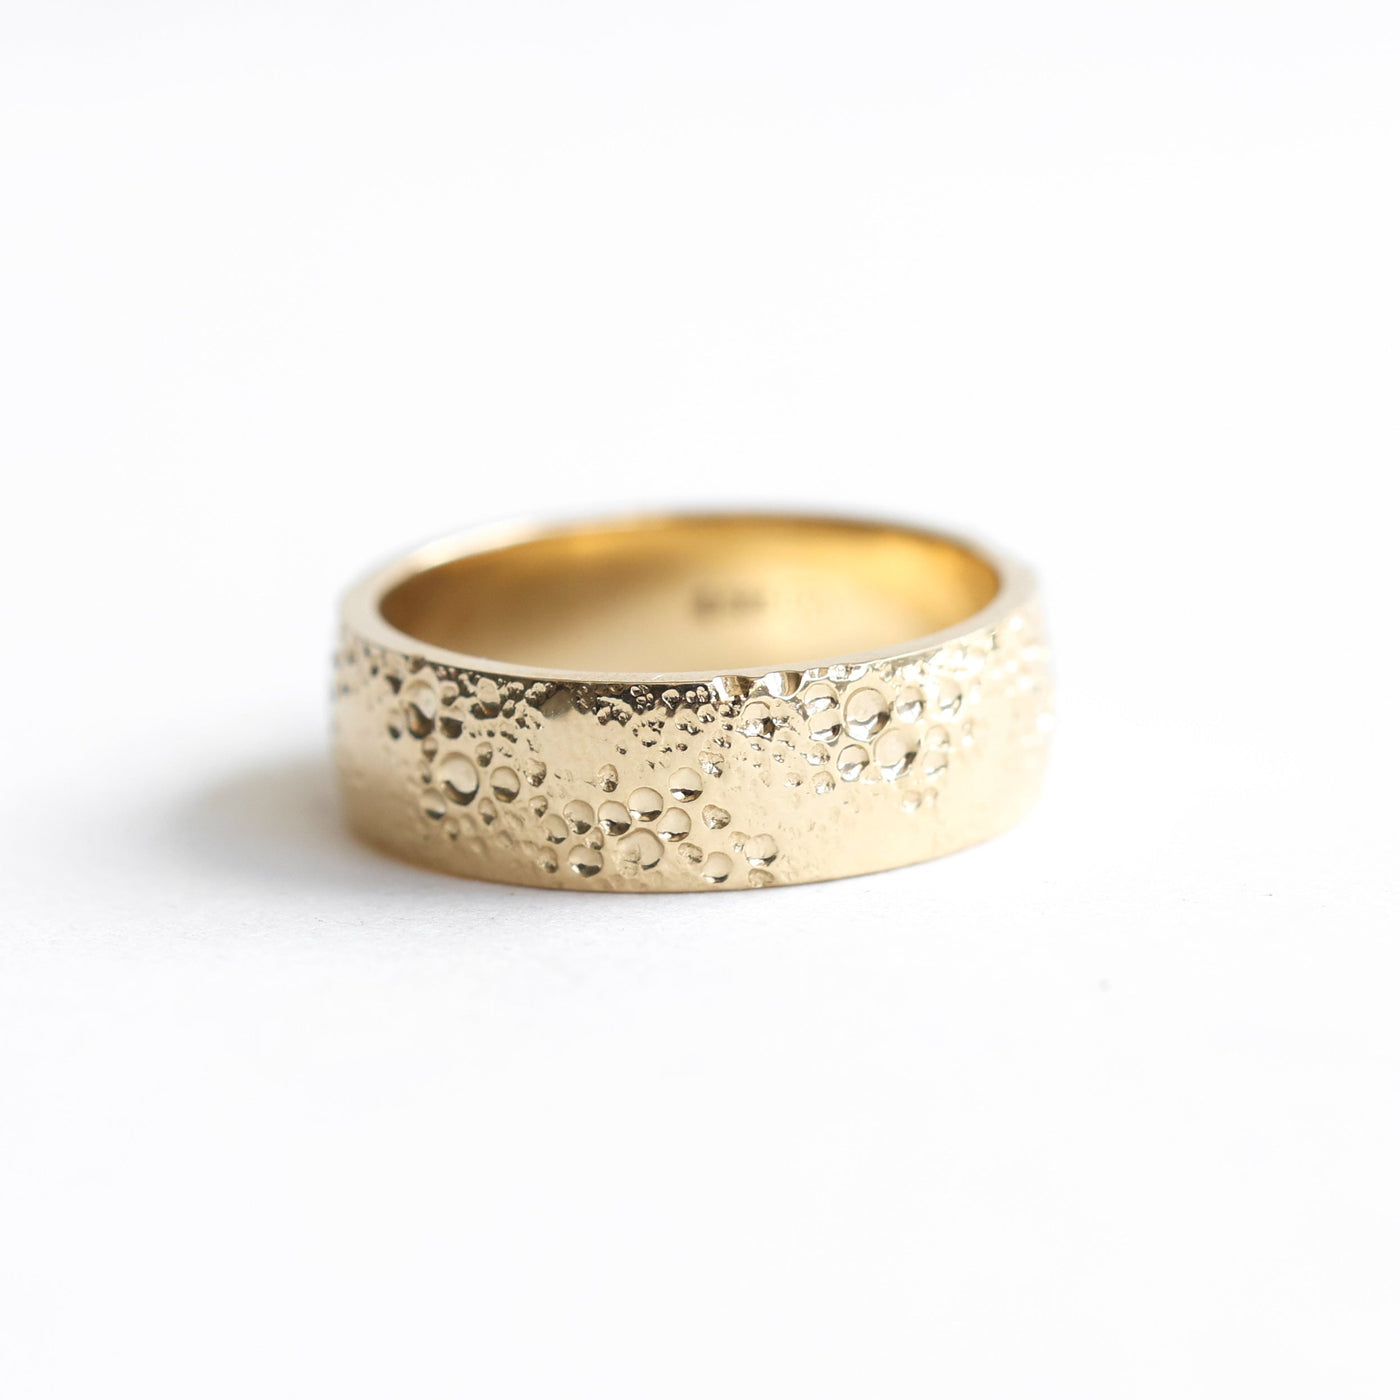 Textured gold wedding band, unisex design with twist, available in 14k/18k gold and platinum. Customize with gemstones.